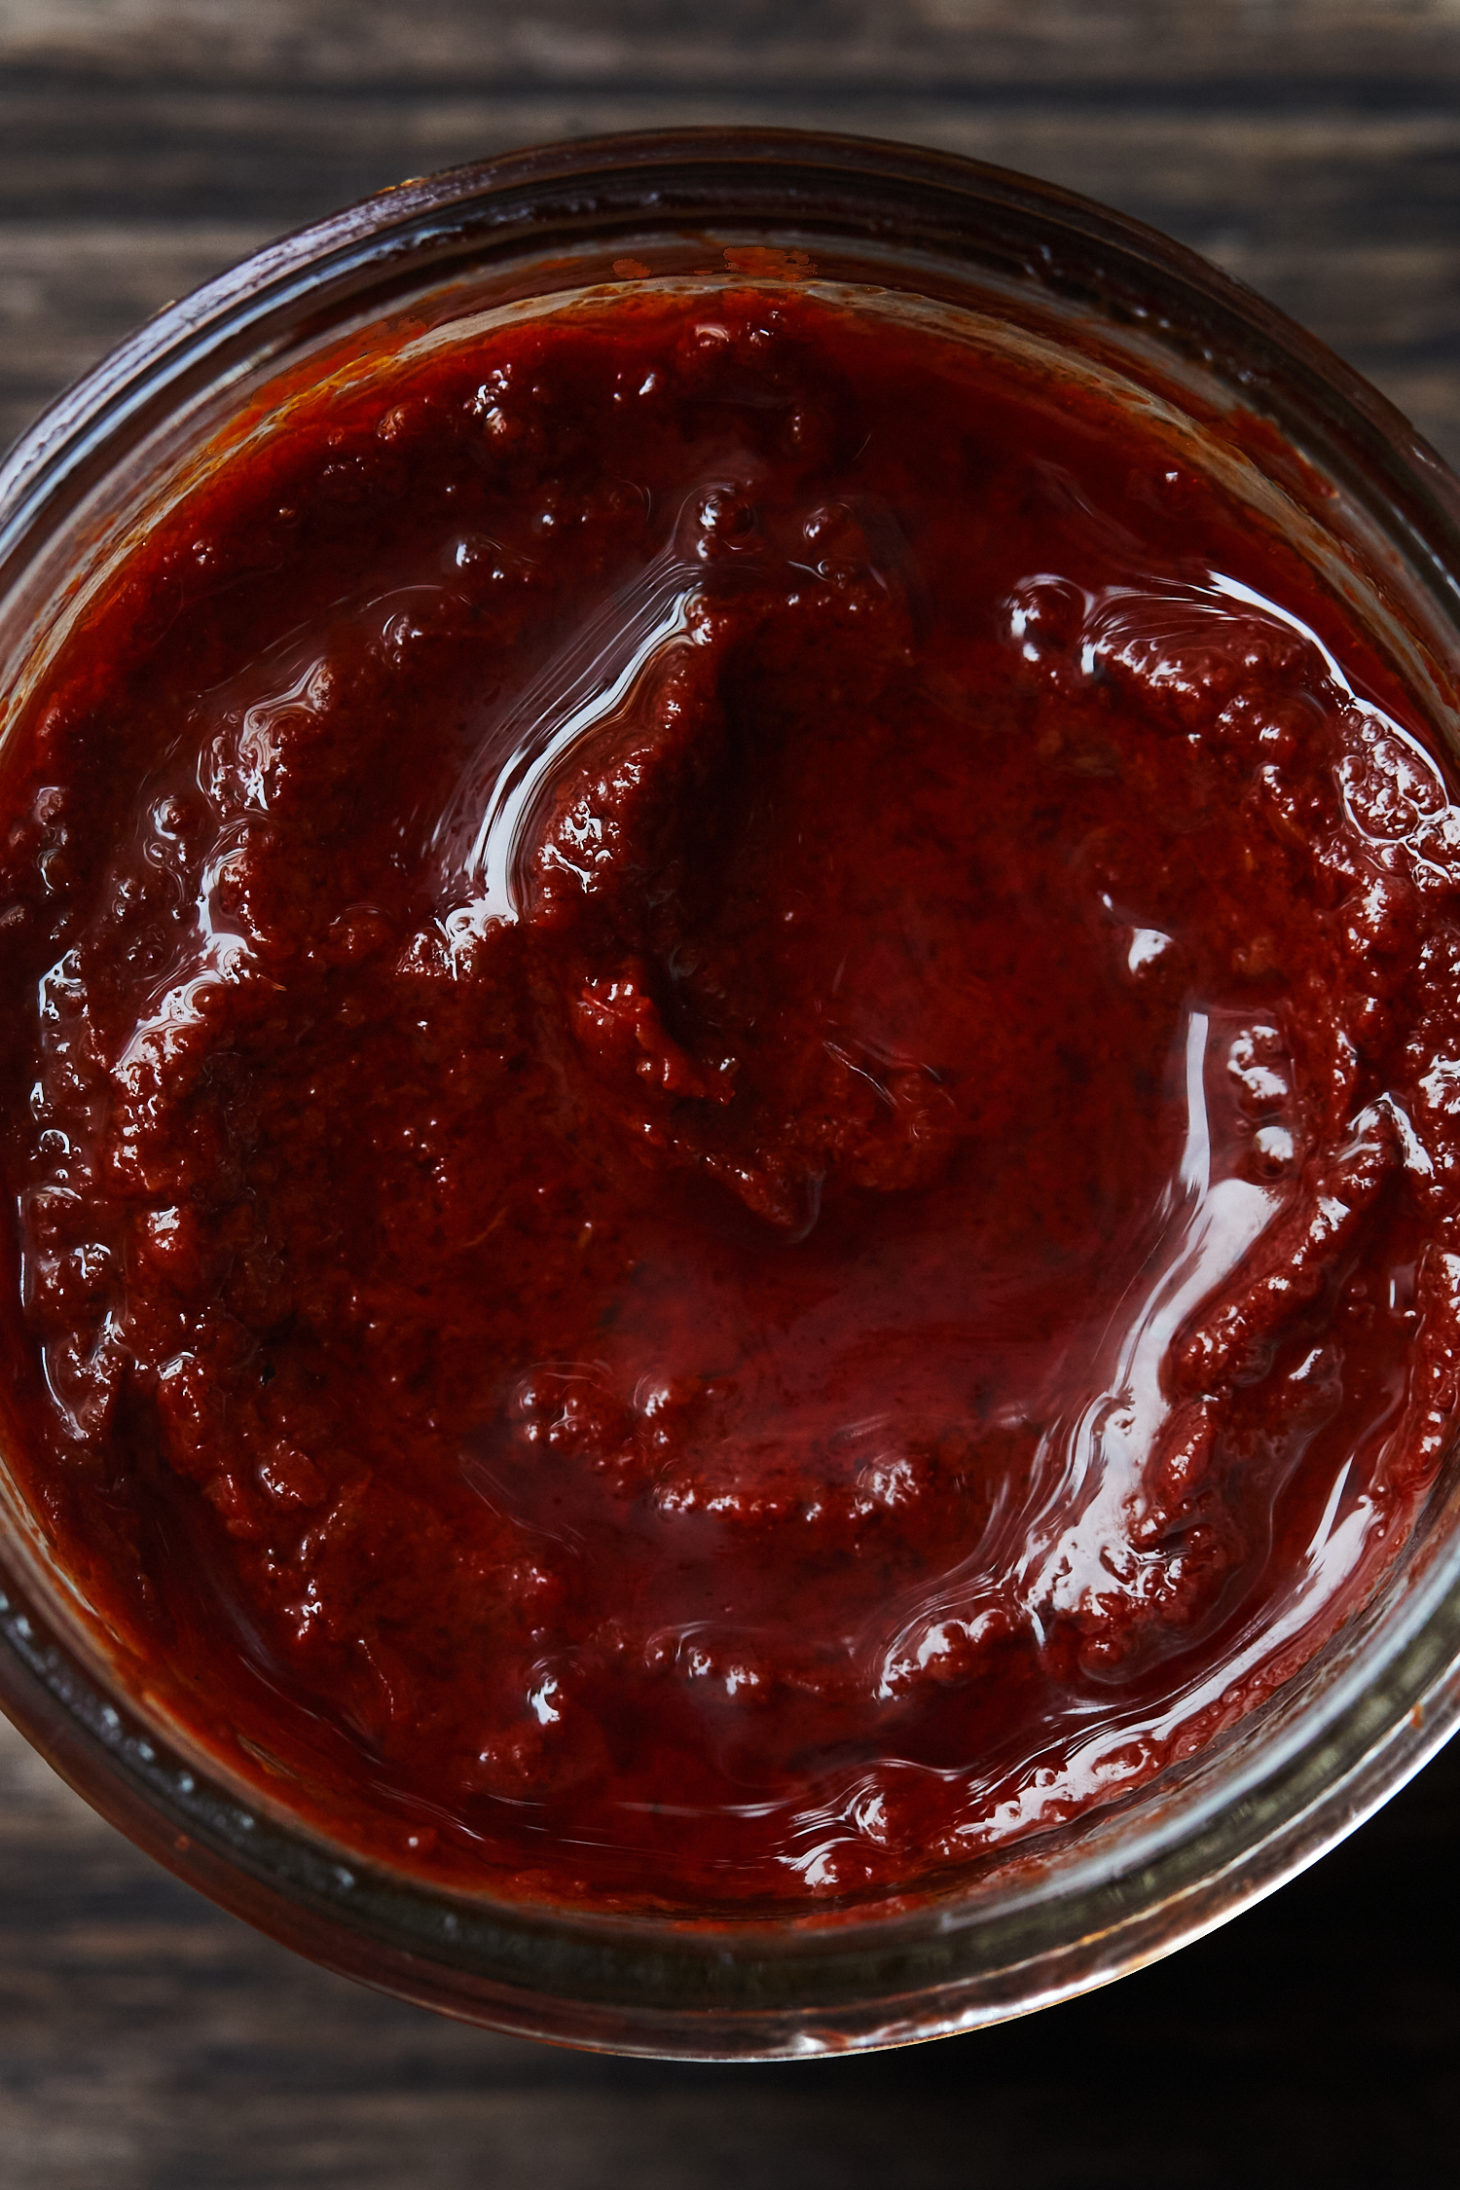 Close-up of a reddish paste in a clear jar.